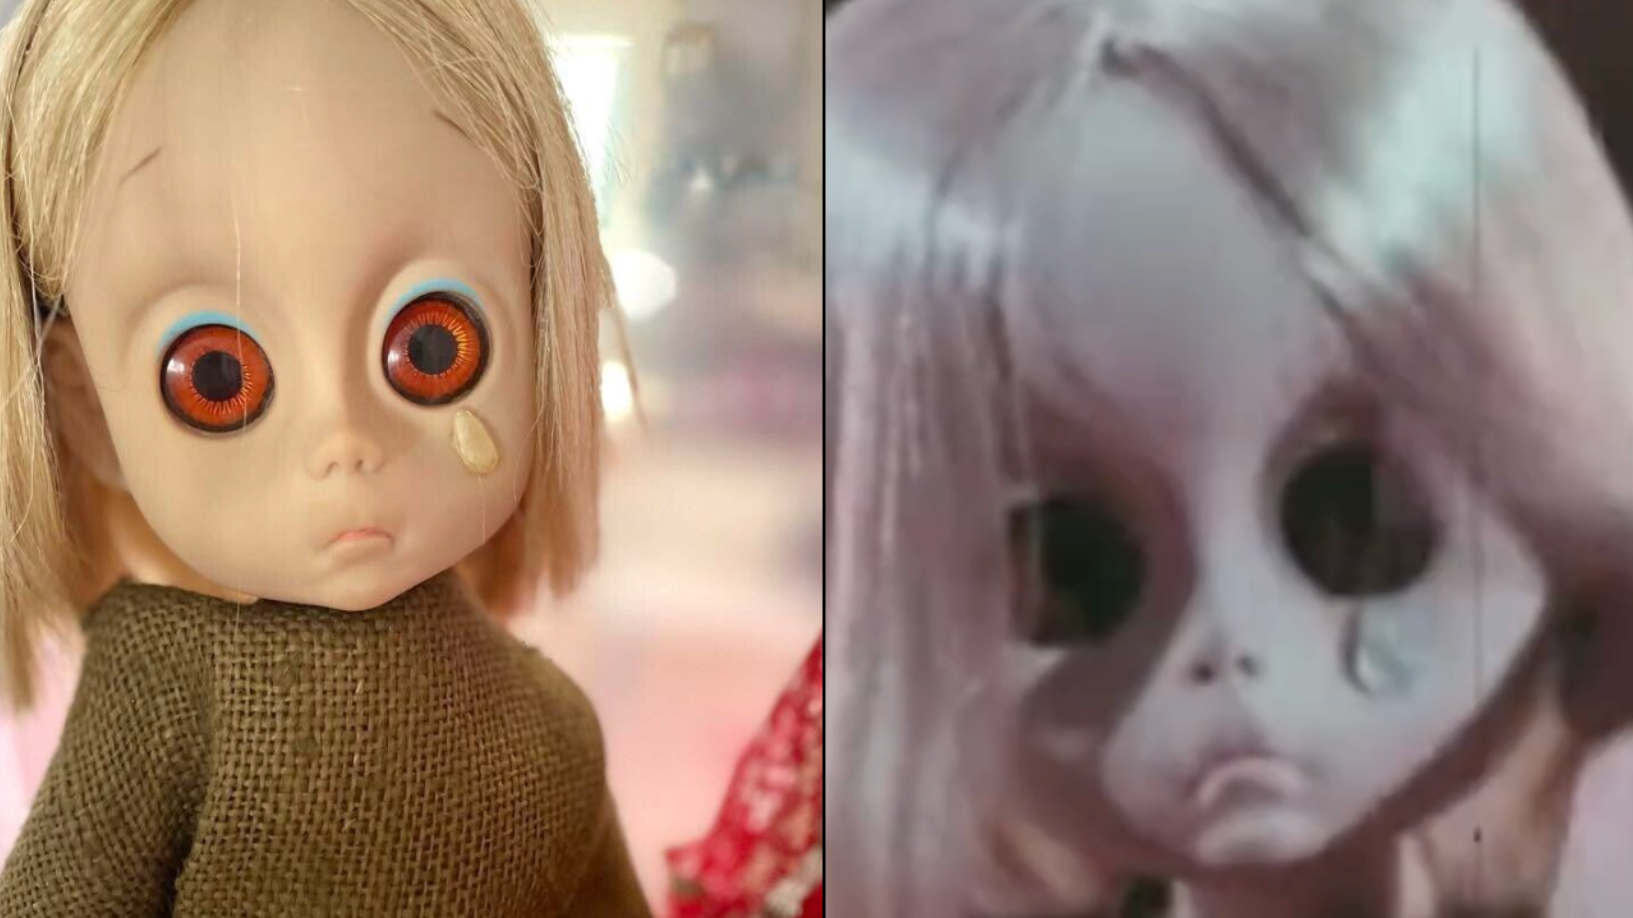 Terrifying doll pulled after leaving children scarred now goes for 